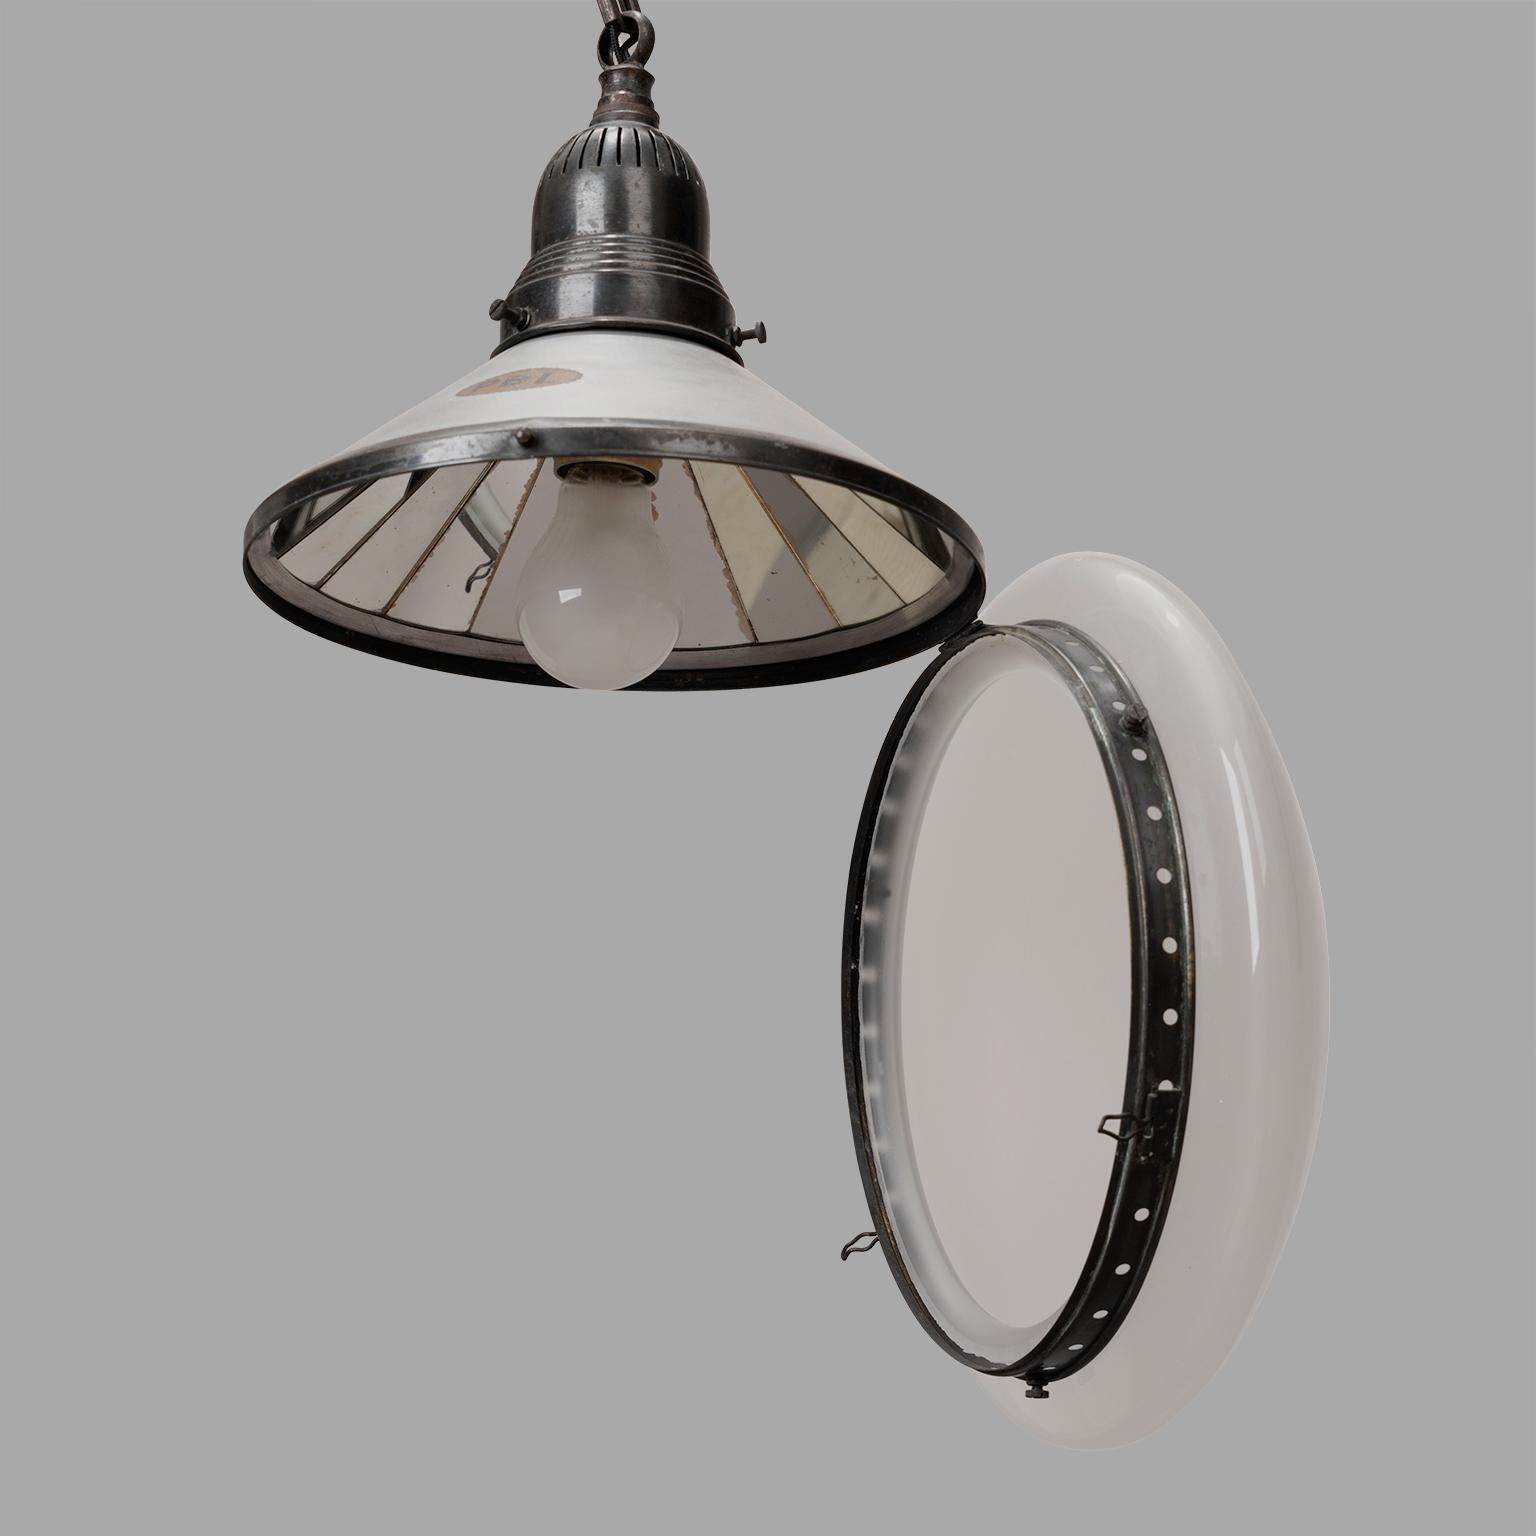 Blackened brass and aluminium reflector with mirrored facets, frosted glass globe. Contemporary wiring (E27 socket).